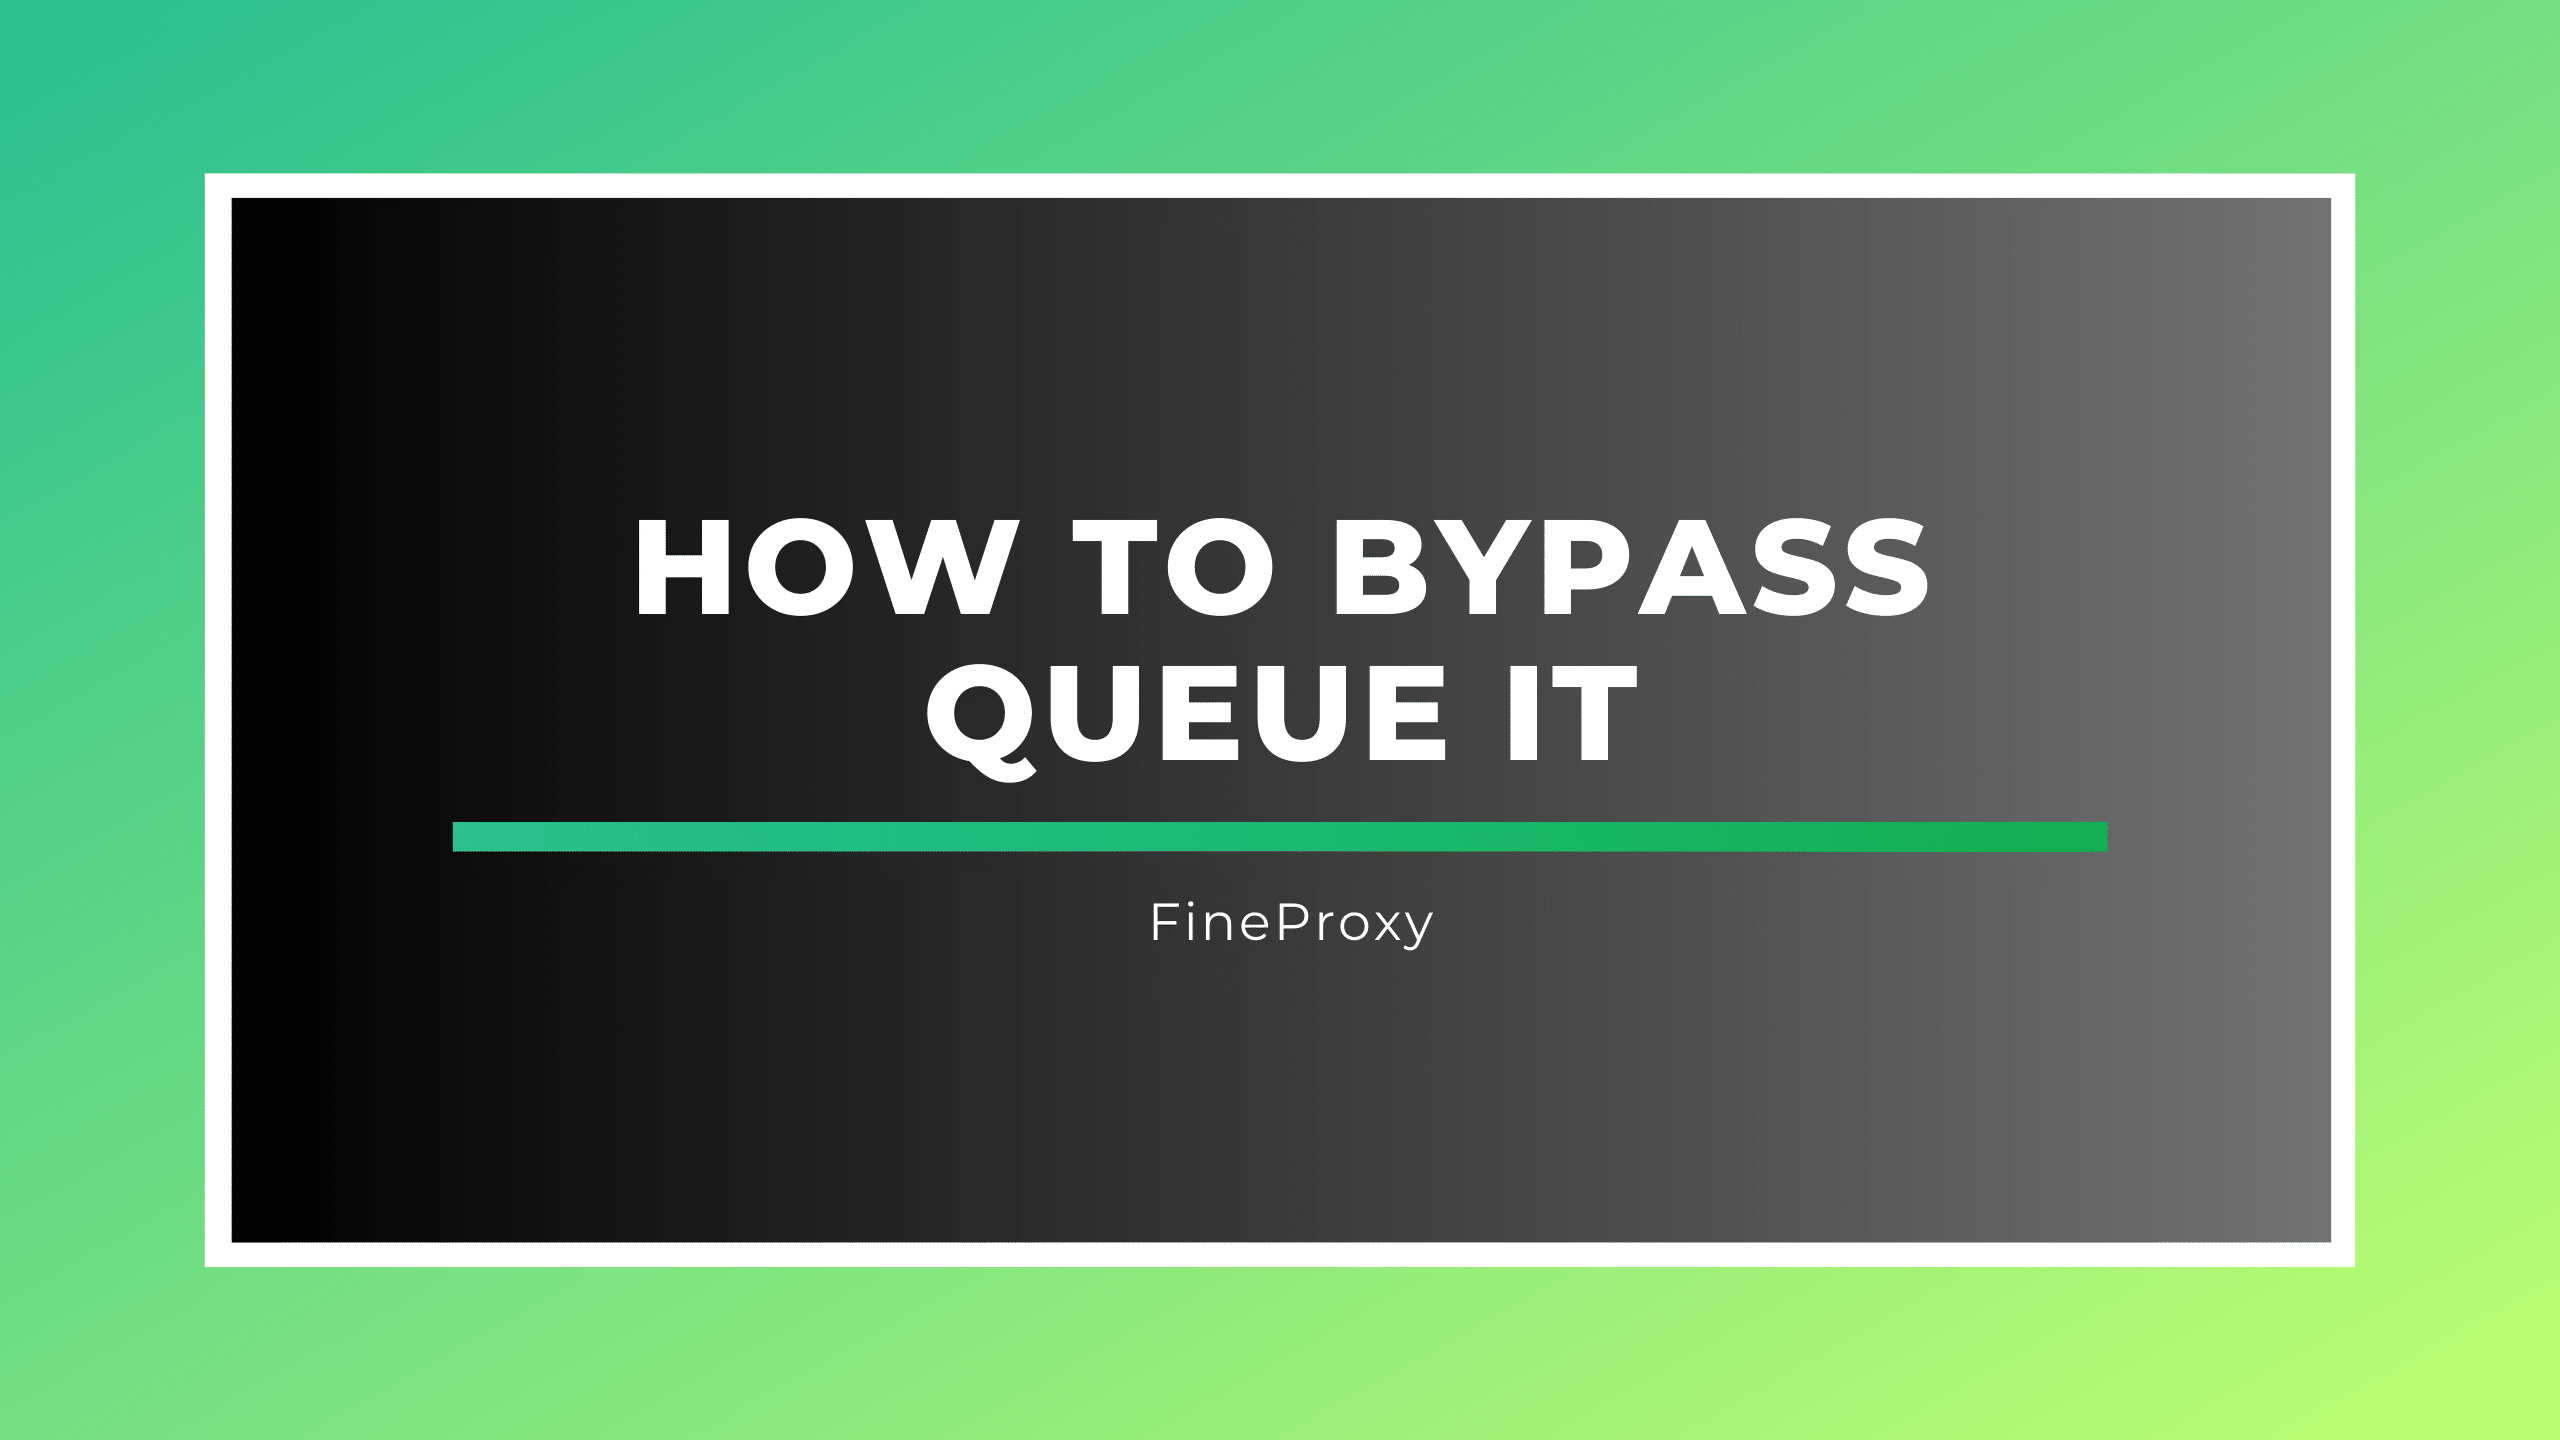 How to bypass queue it